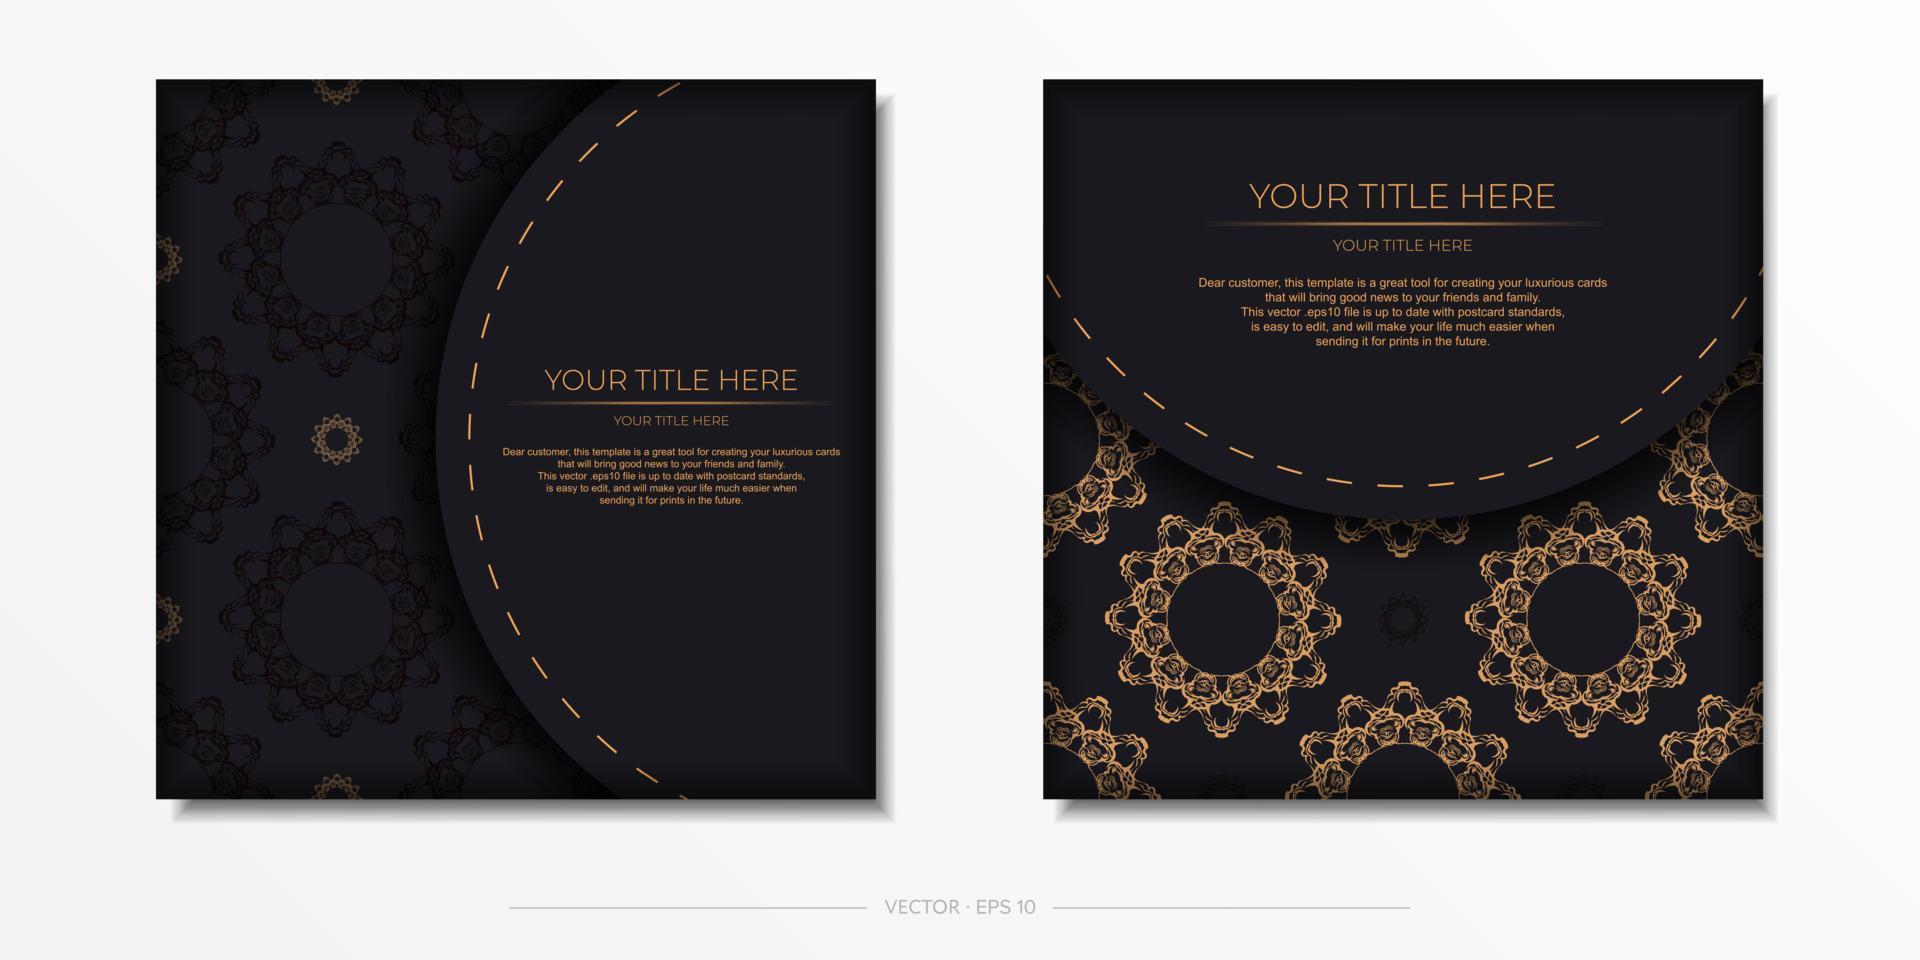 Square Vector Preparing postcards in black with luxurious golden patterns. Template for print design invitation card with vintage ornament.